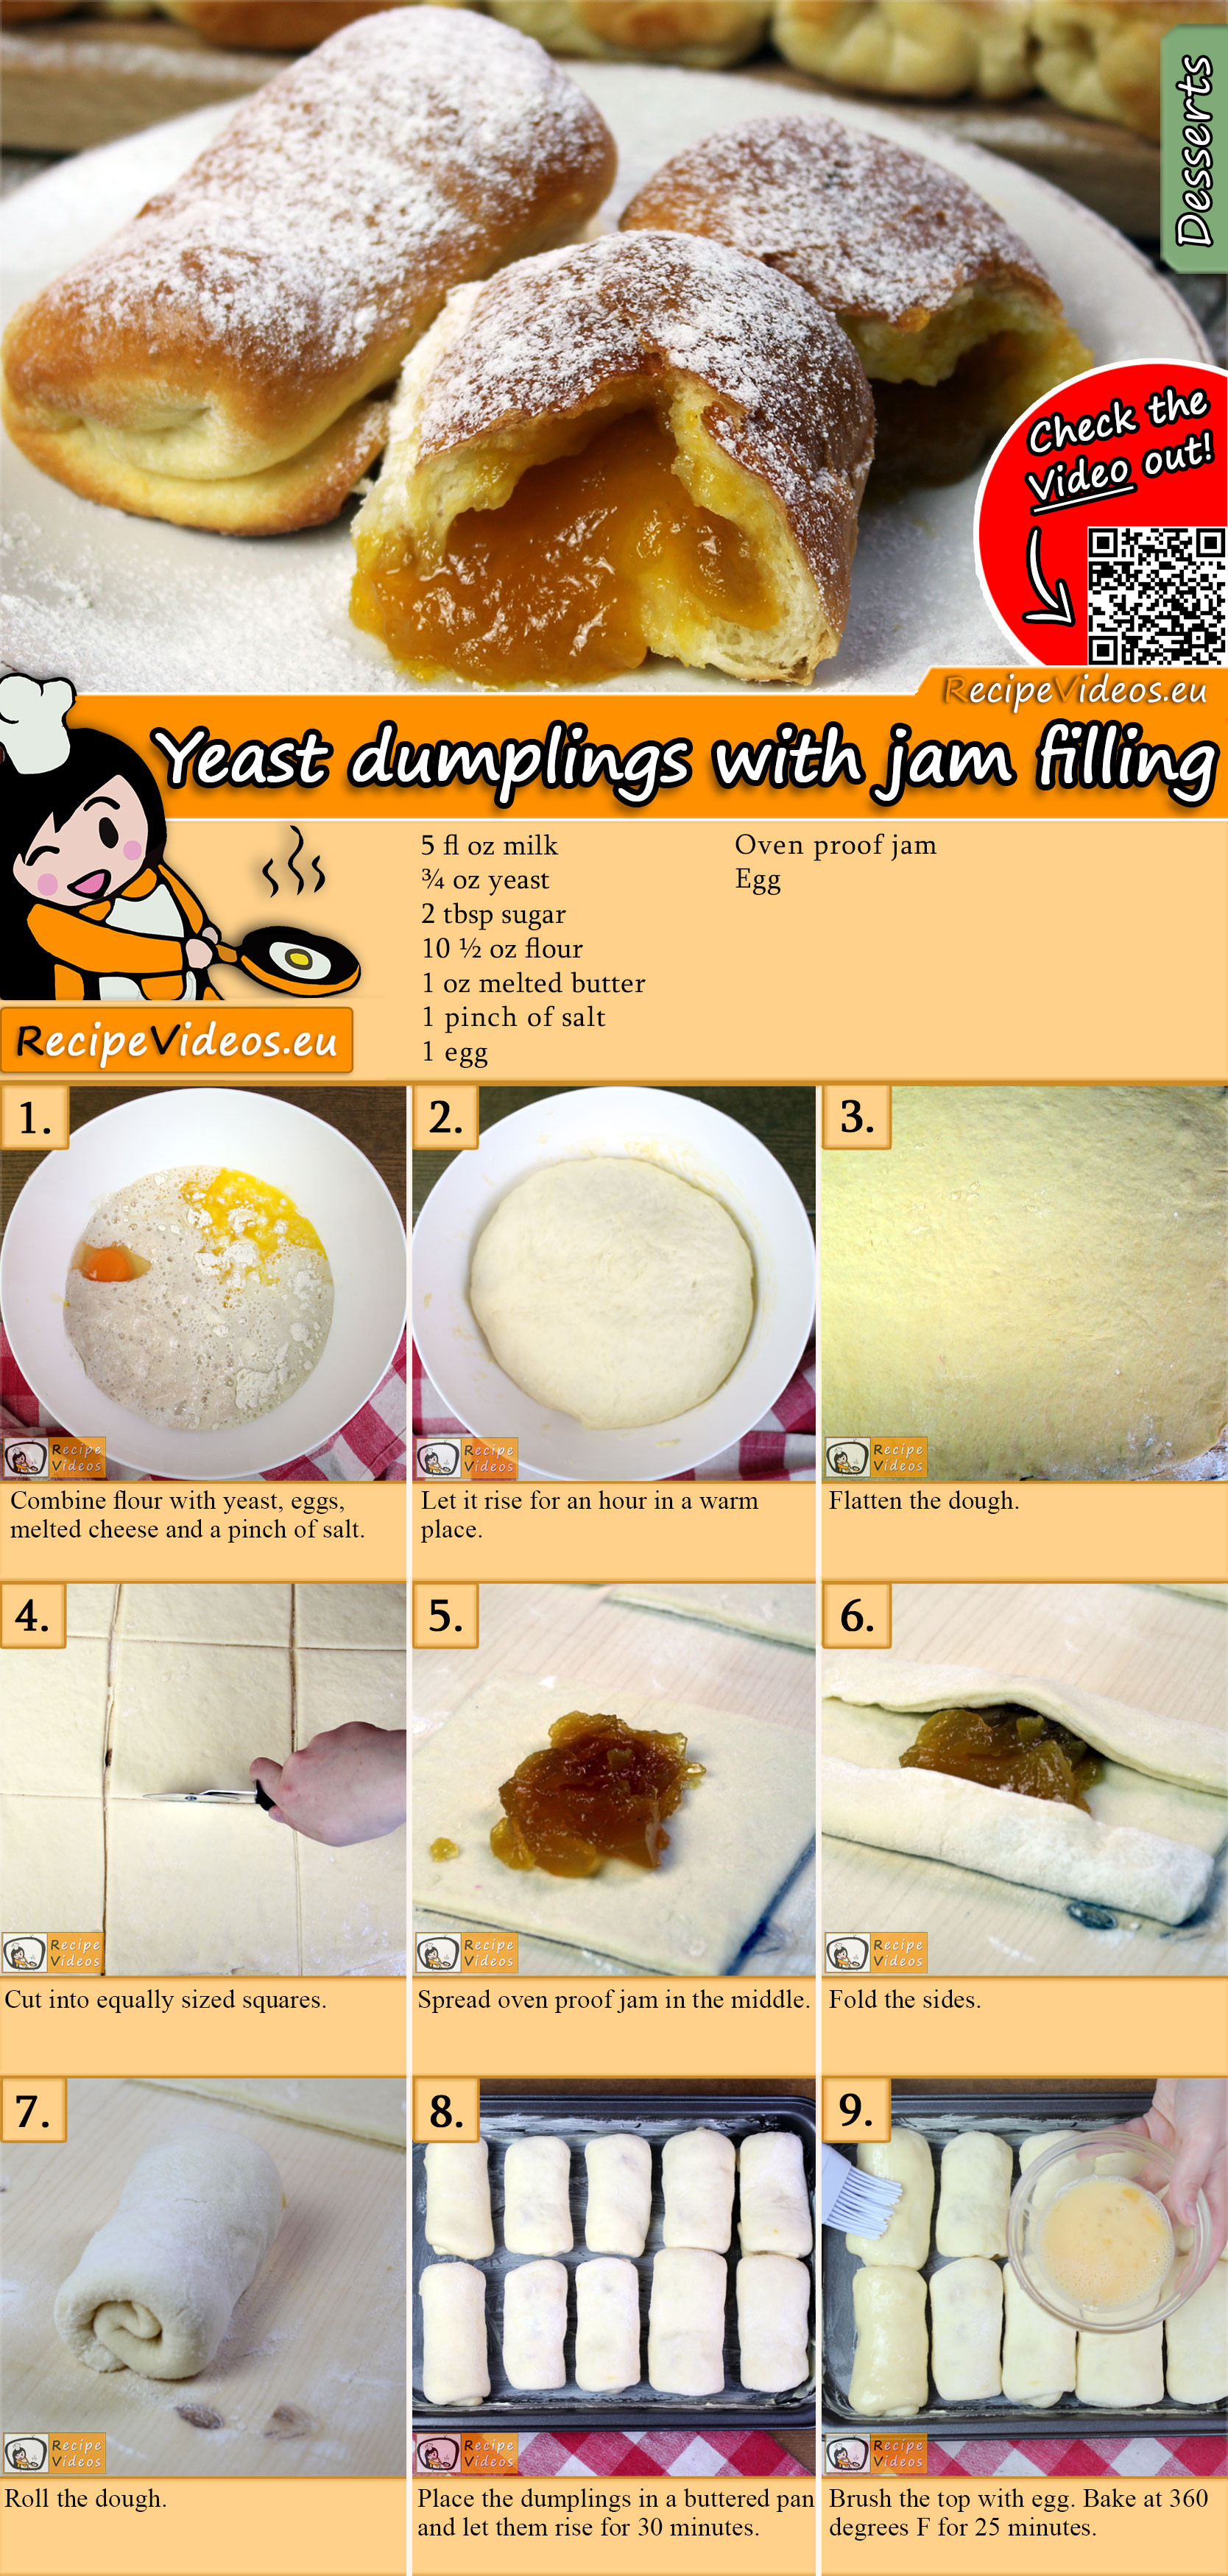 Yeast dumplings with jam filling recipe with video